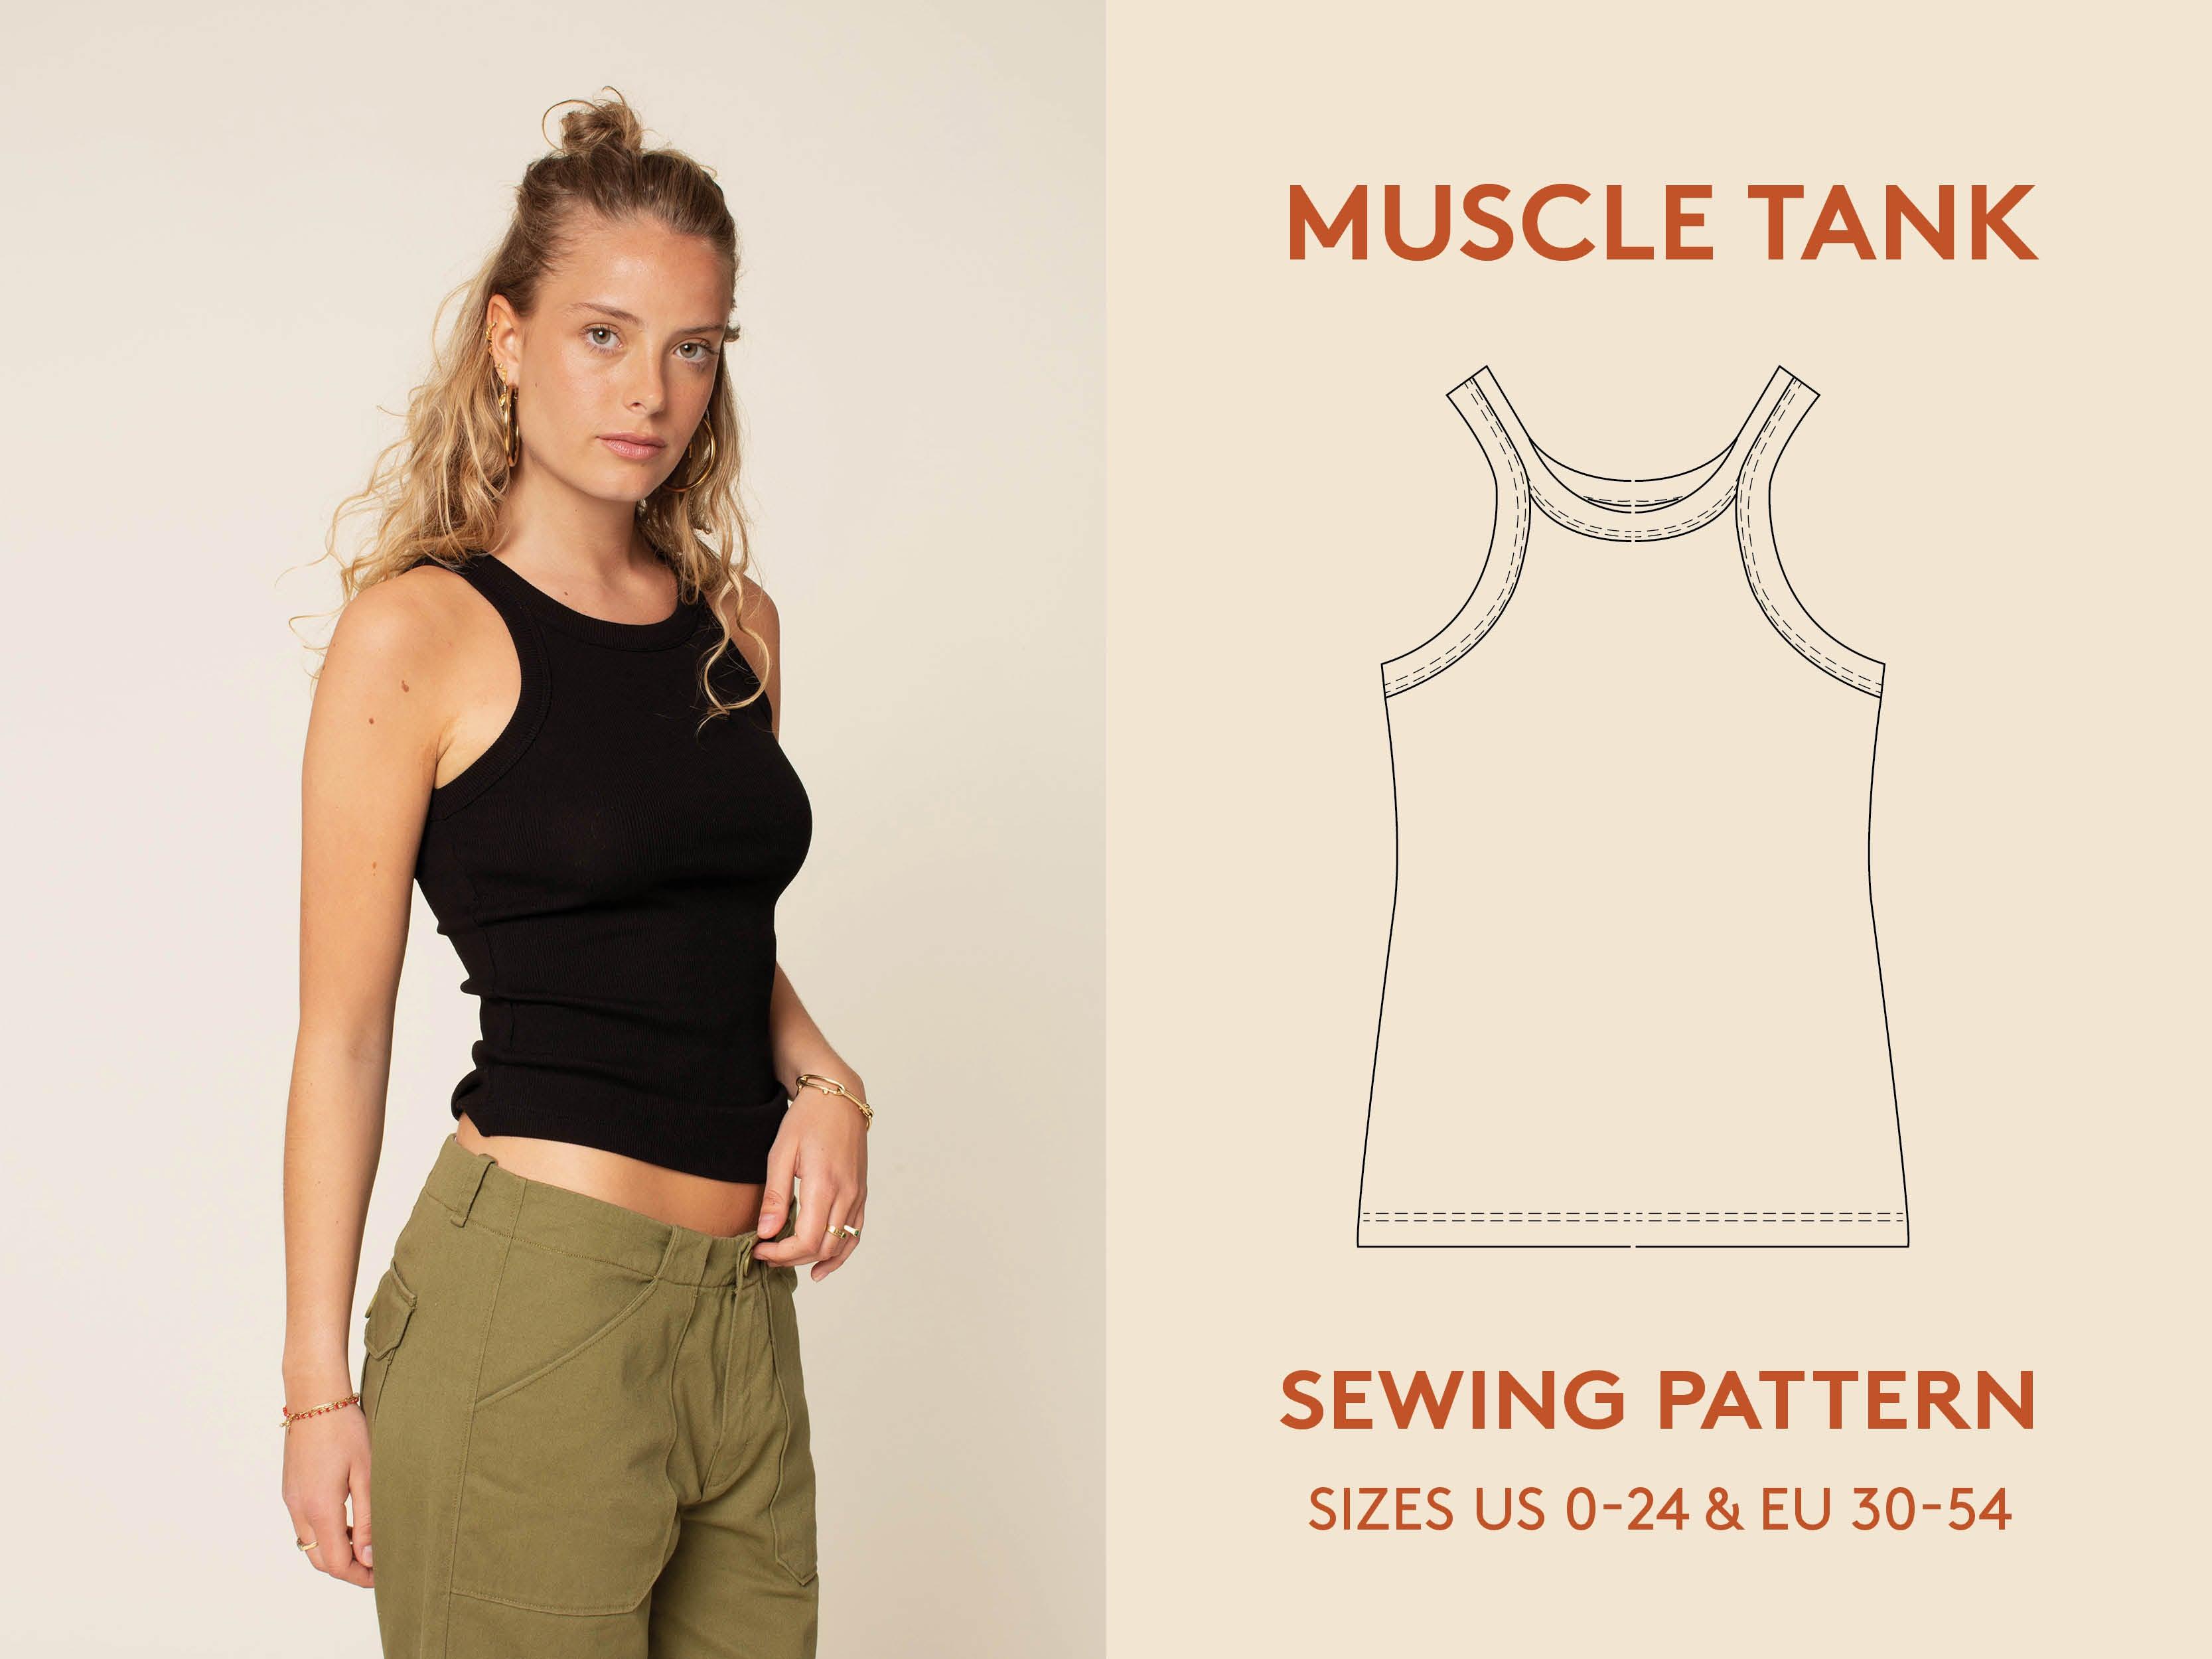 Muscle Tank Top sewing pattern | Wardrobe By Me - We love sewing!